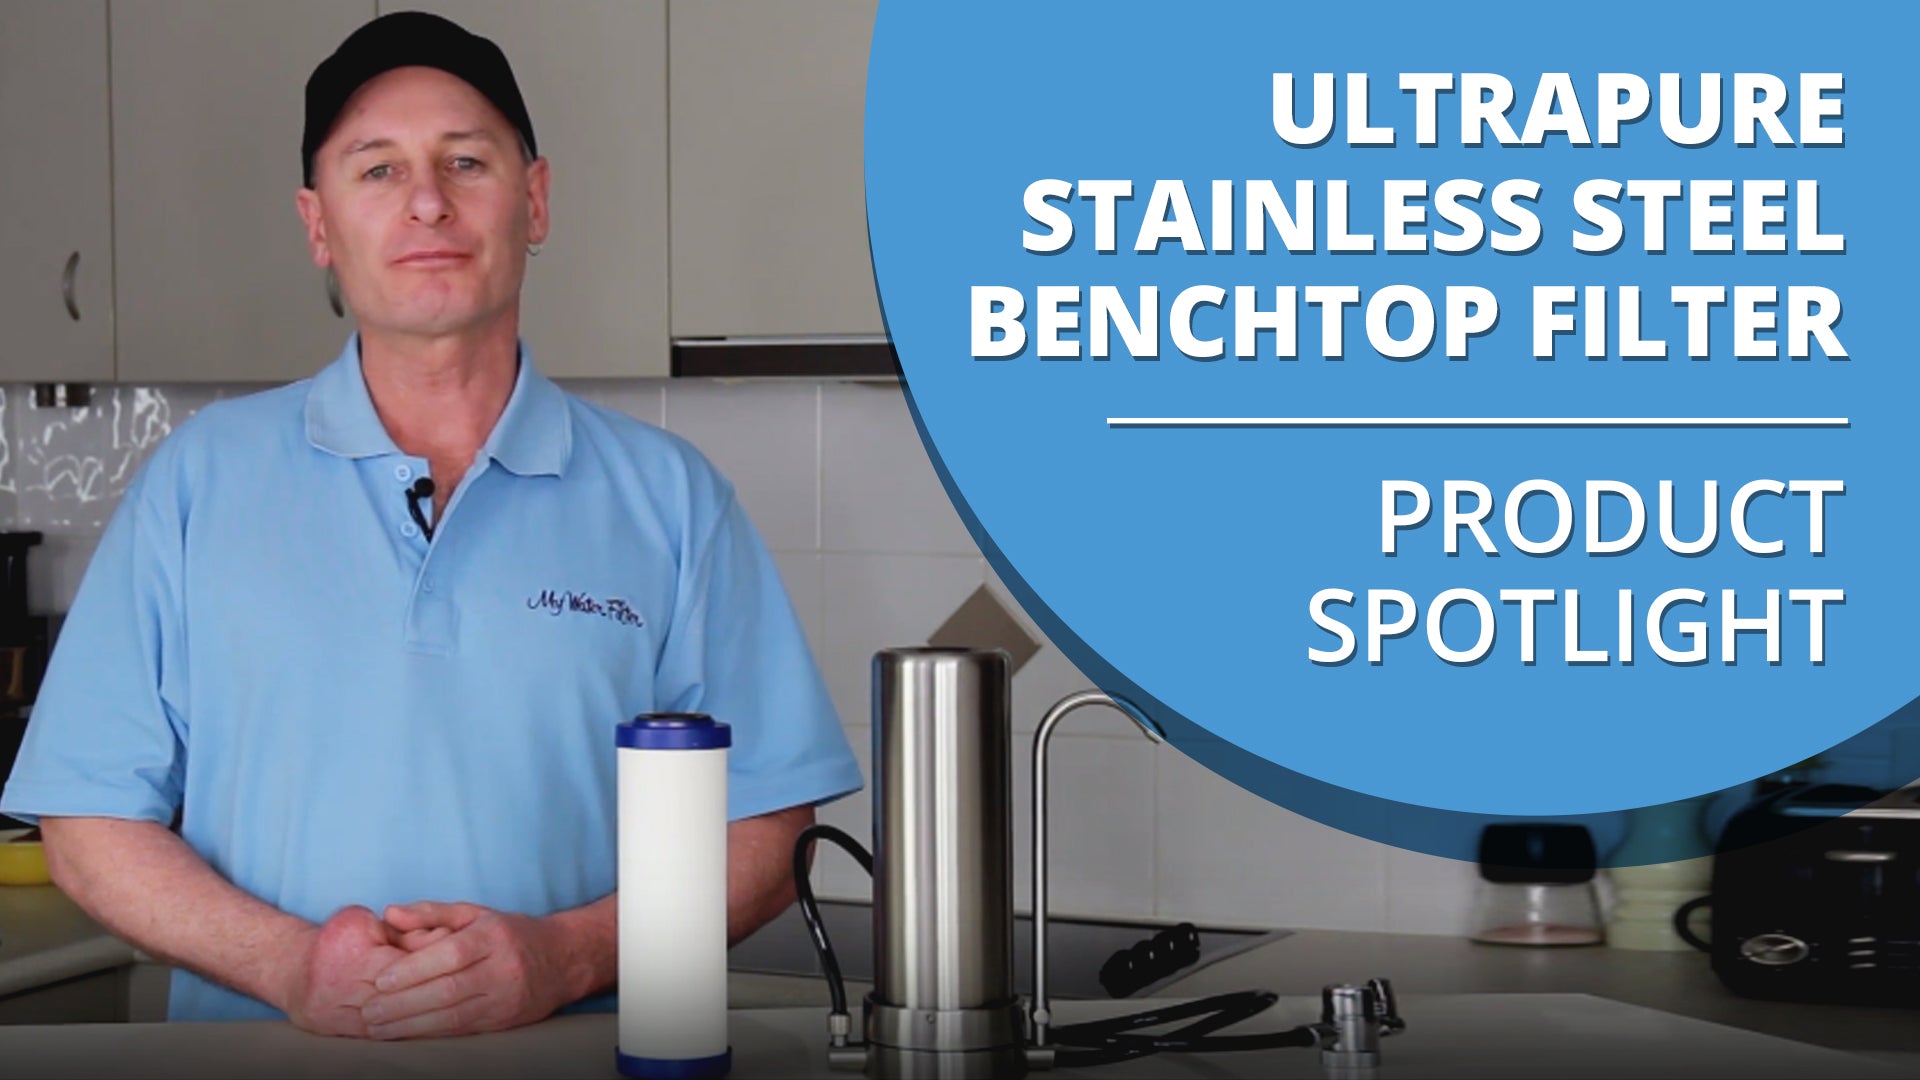 [VIDEO] ULTRAPURE 0.5 Micron Ceramic Single Stage Stainless Steel Bench Top Water Filter - Product Spotlight